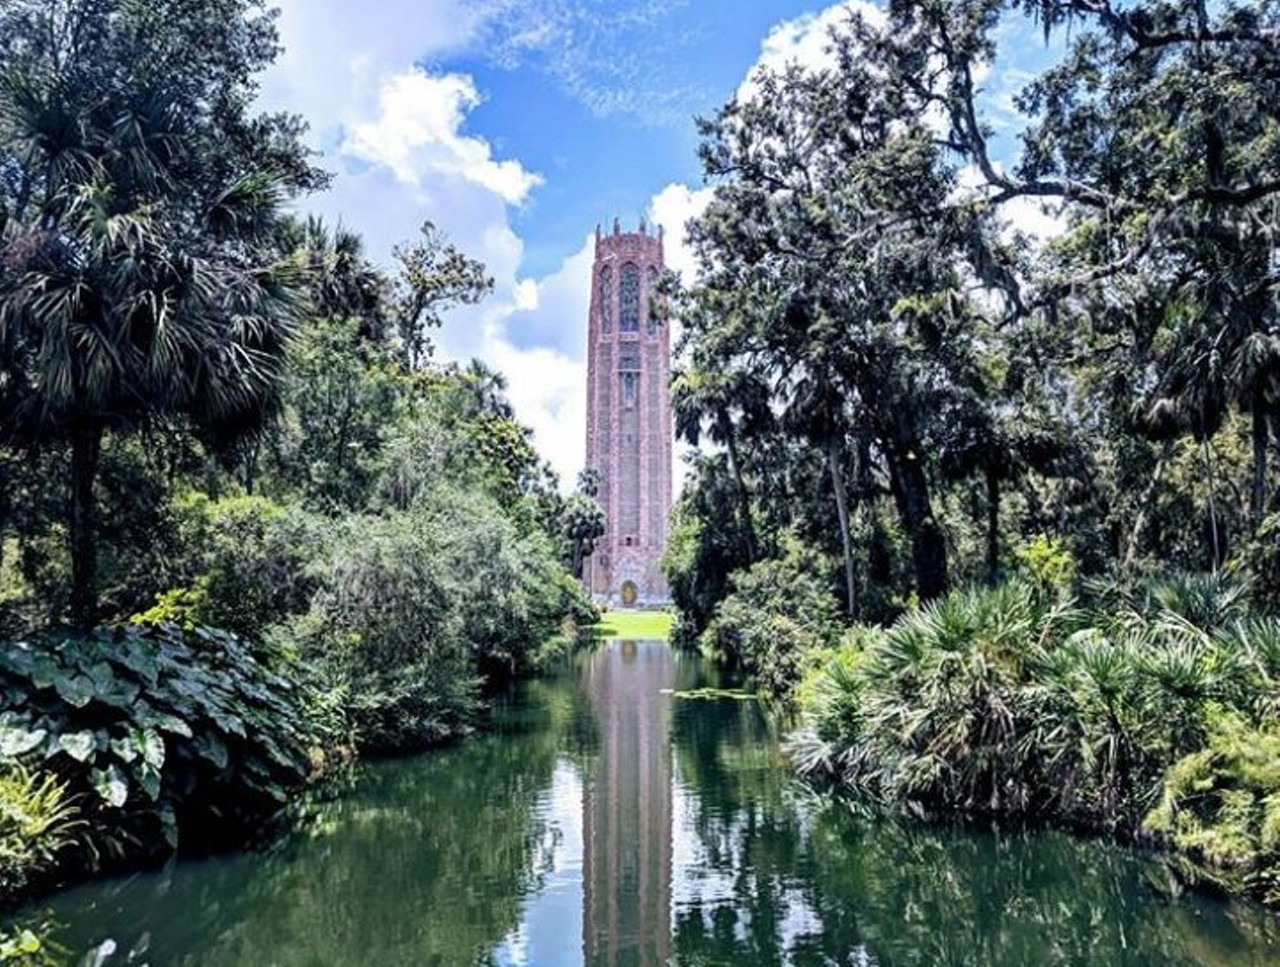 Fulfill your Instagram needs at the Bok Tower Gardens
Estimated driving distance from Orlando: 1 hour 30 minutes 
The Bok Tower Gardens is a historic landmark that tourists and locals flock to alike. The ornate Singing Tower and surrounding greenery makes for the perfect Instagram photo op. The gardens are open 365 days a year and house beautiful nature trails and other attractions, such as the Pinewood Estate and the Hammock Hollow Children&#146;s Garden. 
Photo via meowcourtney /Instagram